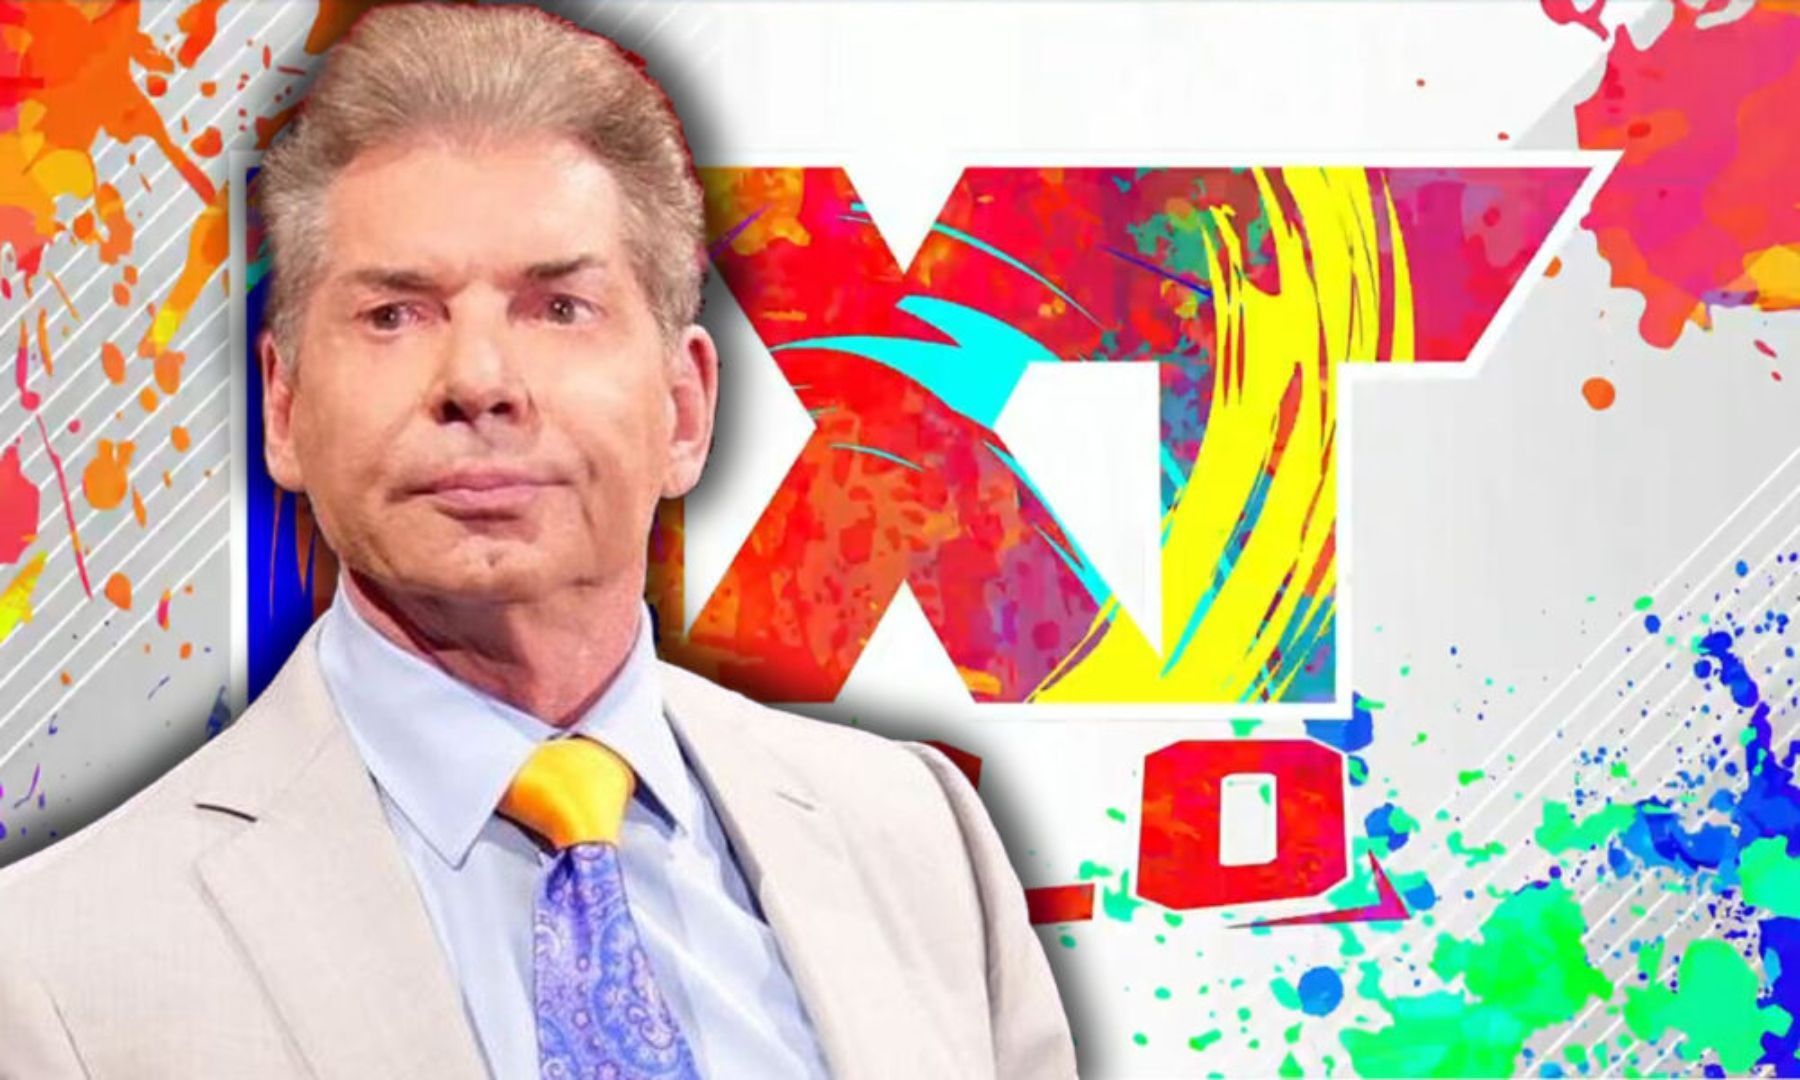 Vince McMahon has looked to change the image of NXT